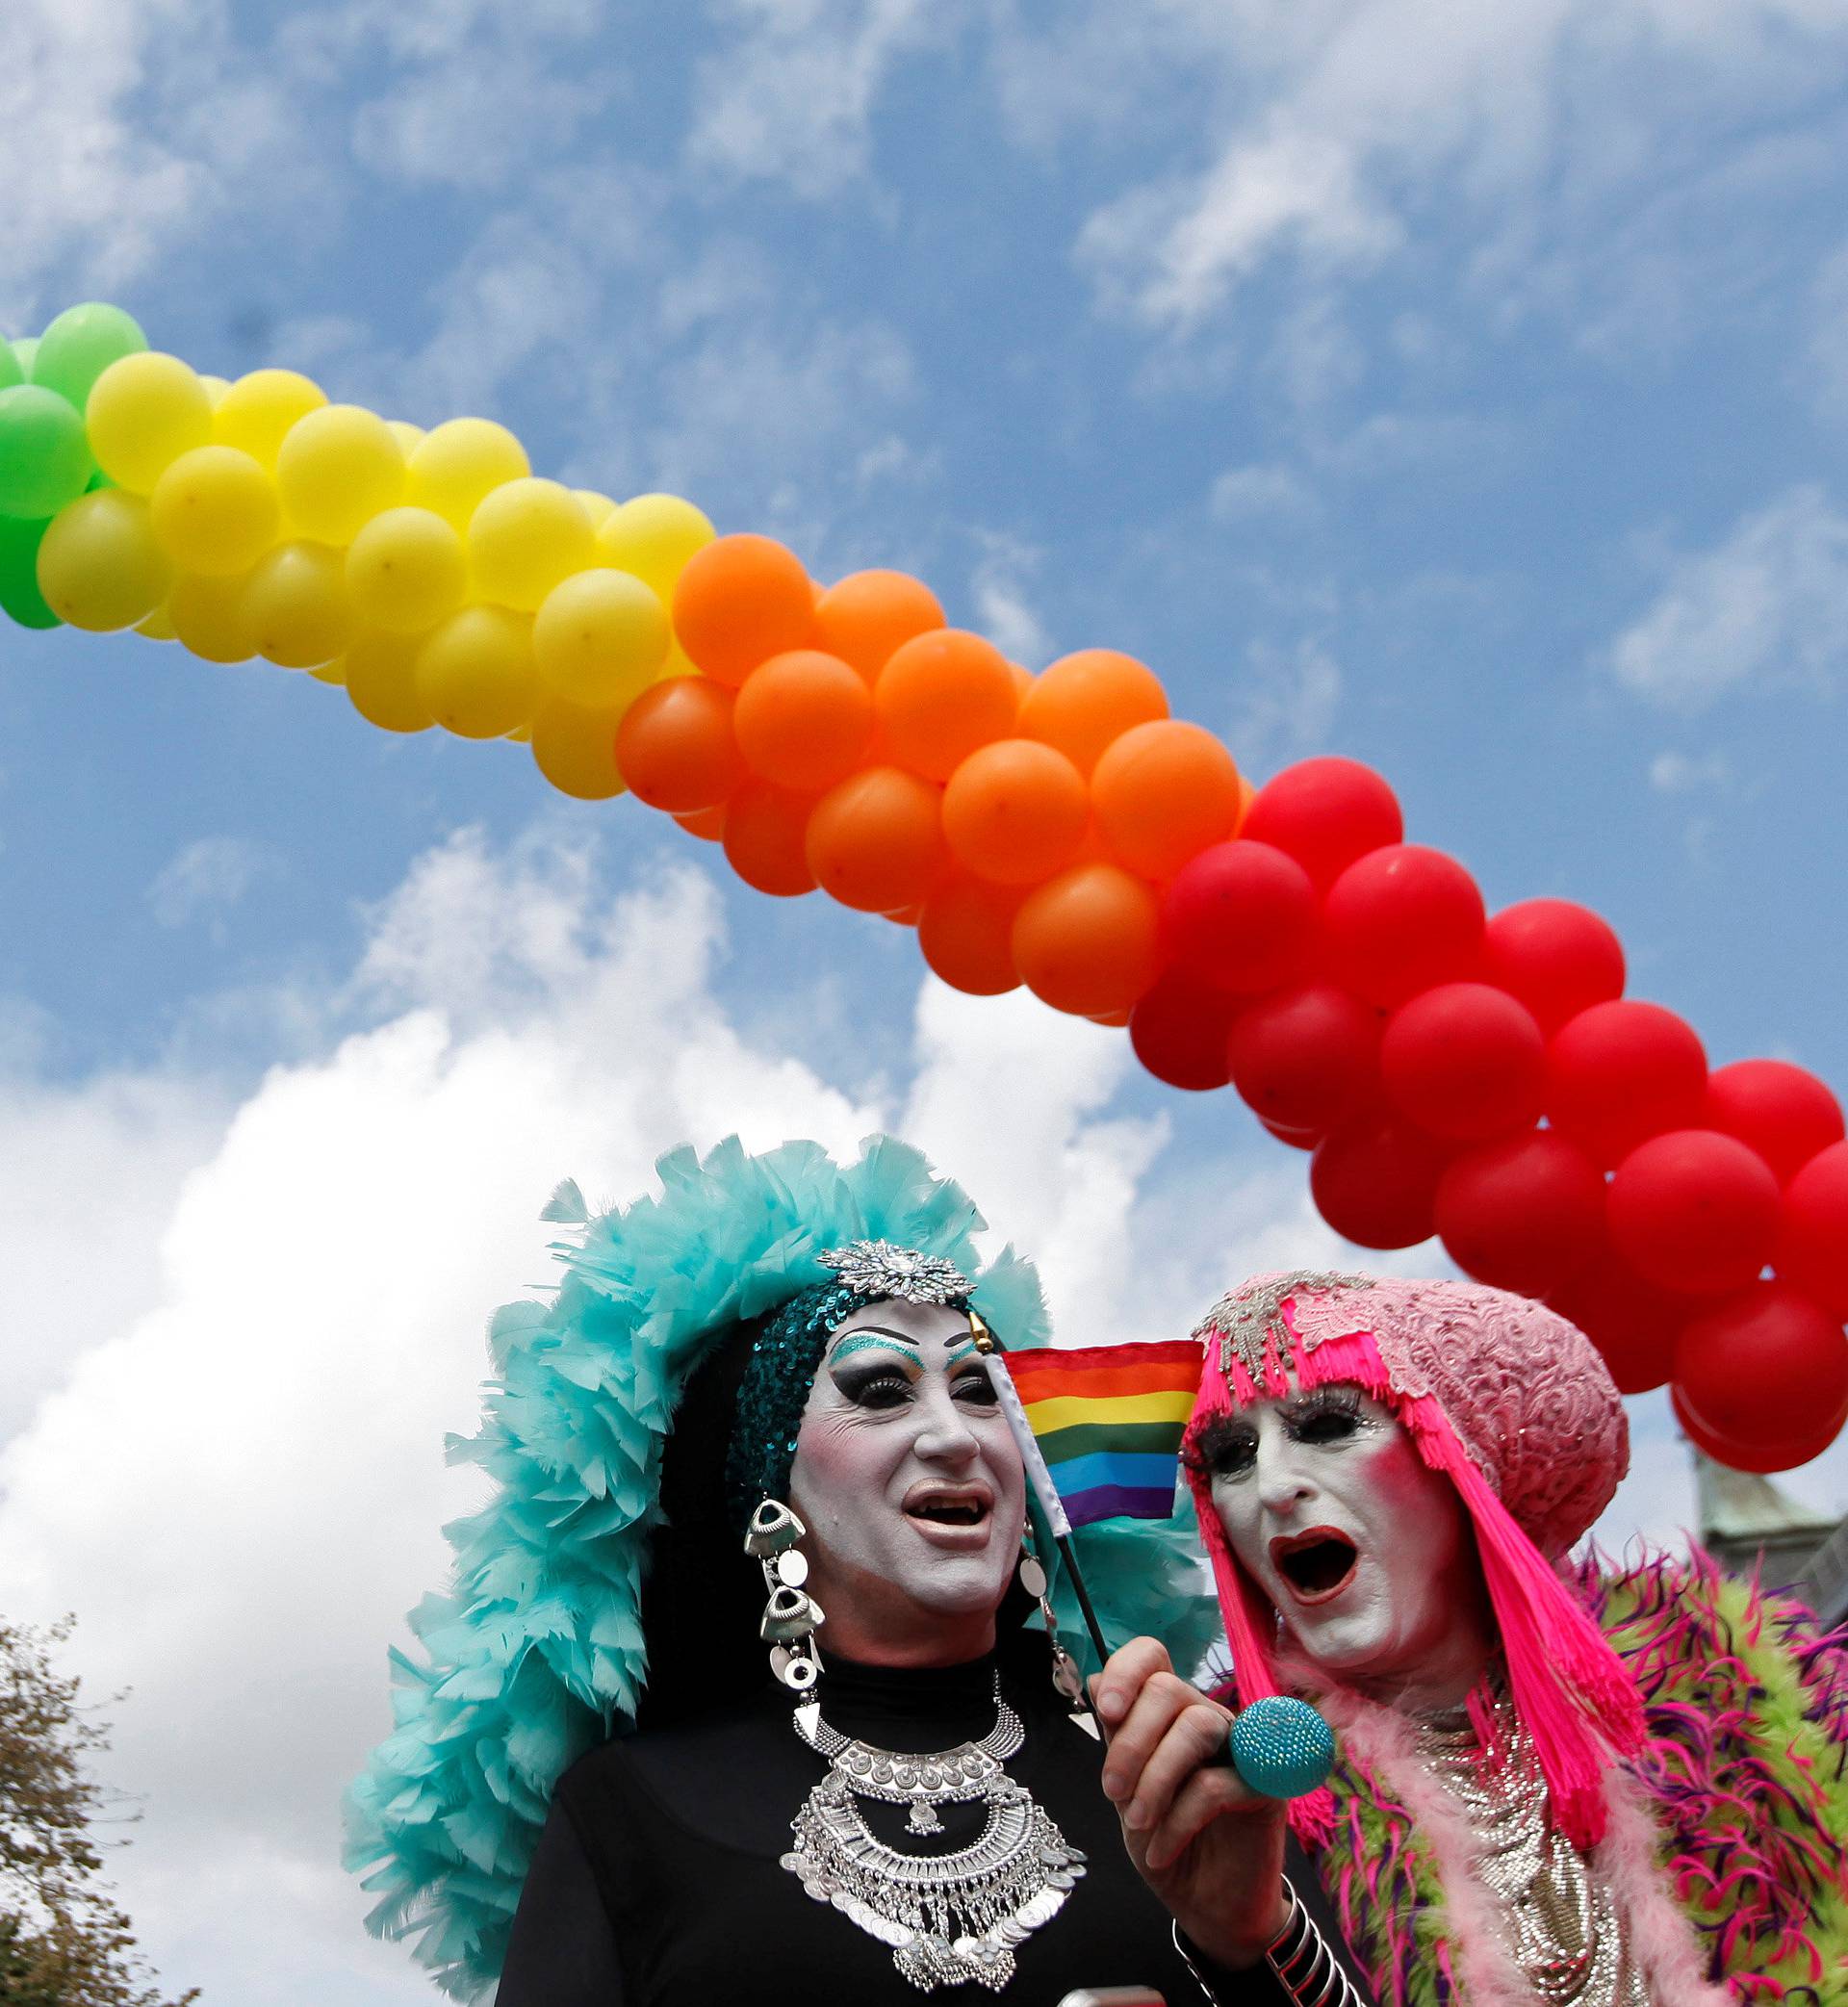 Participants attend the Prague Pride Parade where thousands marched through the city centre in support of gay rights, in Czech Republic